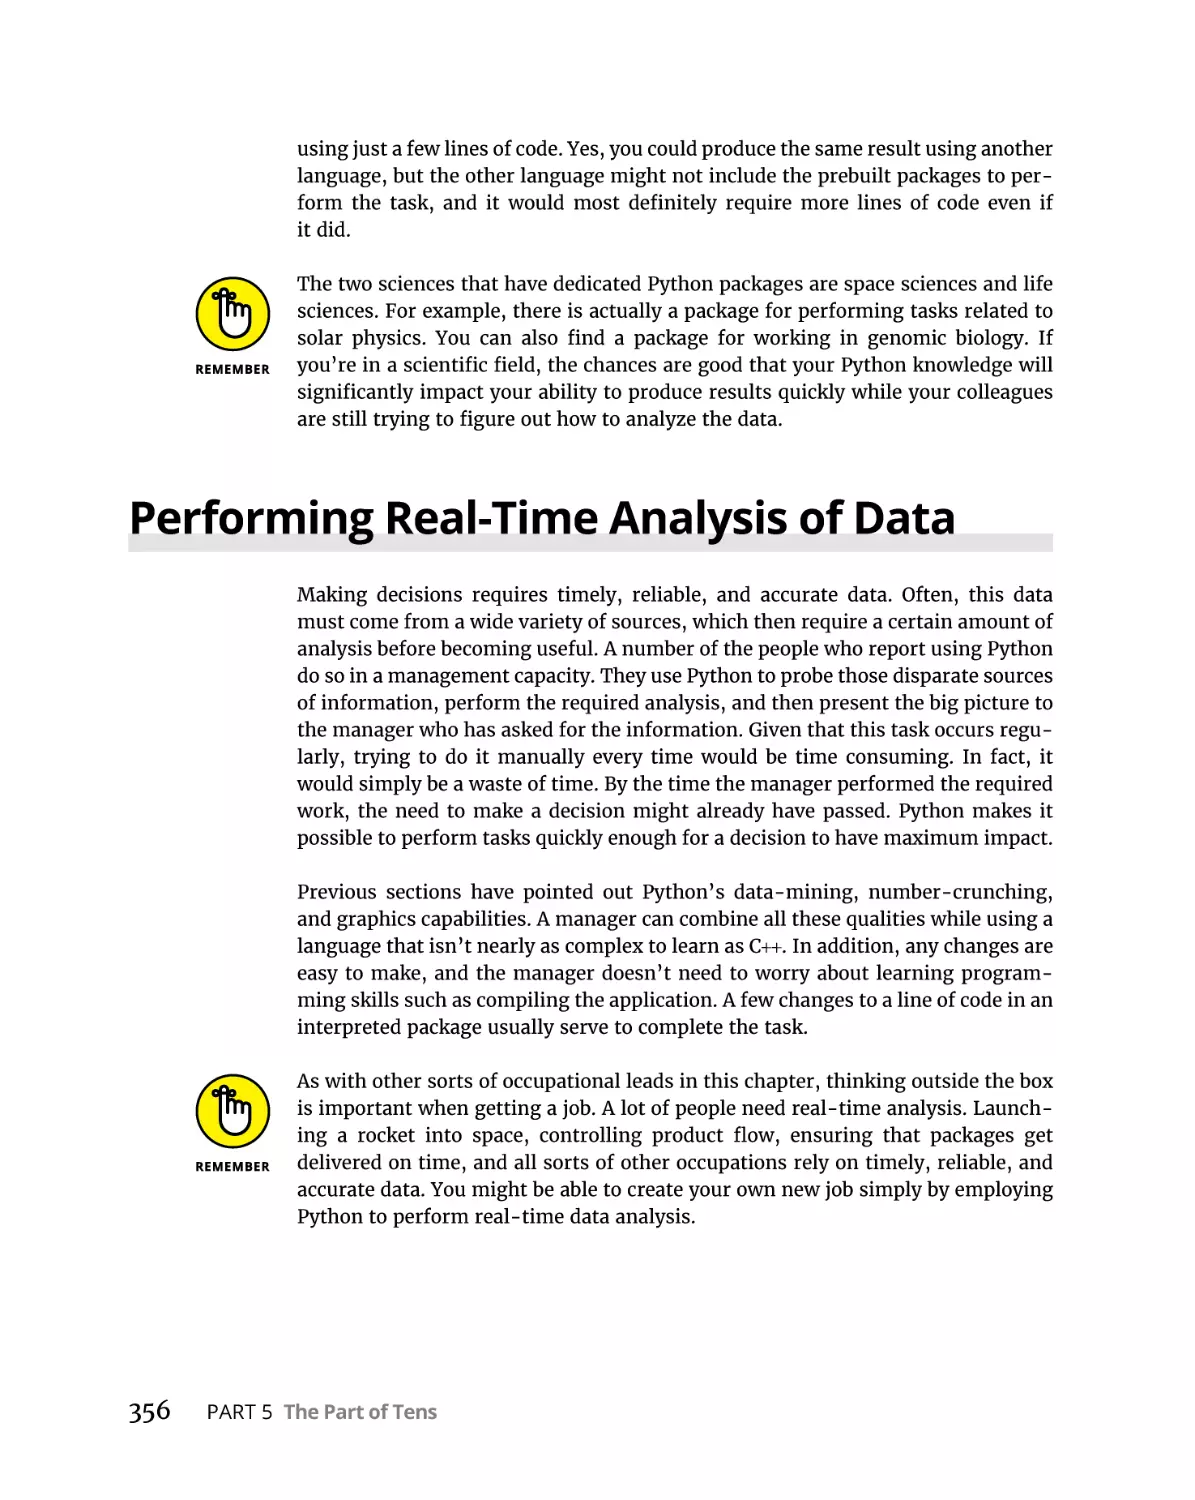 Performing Real-Time Analysis of Data